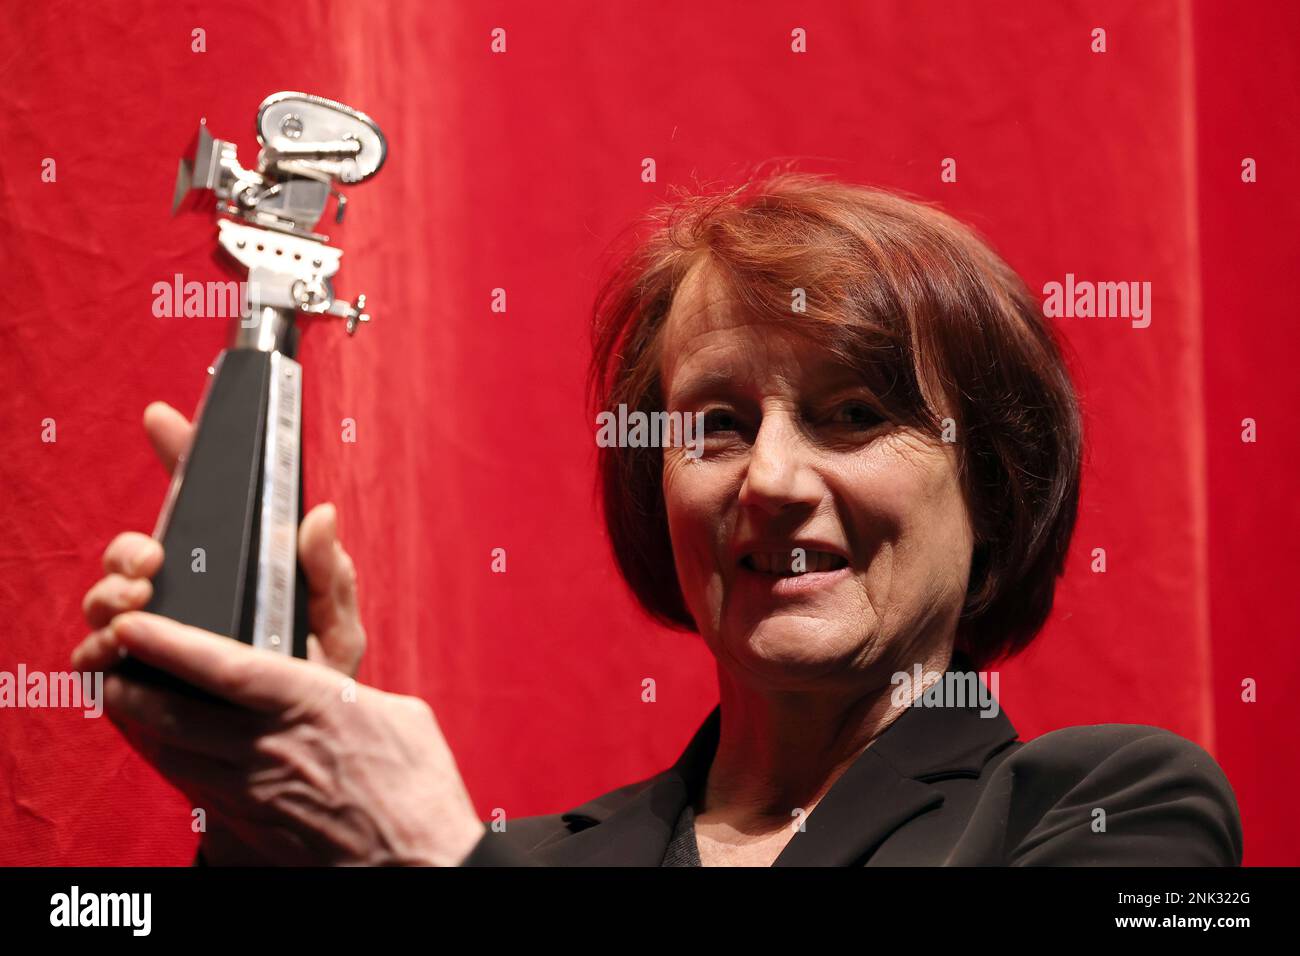 Berlin, Germany. 23rd Feb, 2023. French cinematographer Caroline Champetier receives the Berlinale Camera at the Haus der Berliner Festspiele. With the Berlinale Camera, the Berlinale honors personalities and institutions that have rendered outstanding services to filmmaking. The 73rd International Film Festival will take place in Berlin from Feb. 16 - 26, 2023. Credit: Gerald Matzka/dpa/Alamy Live News Stock Photo